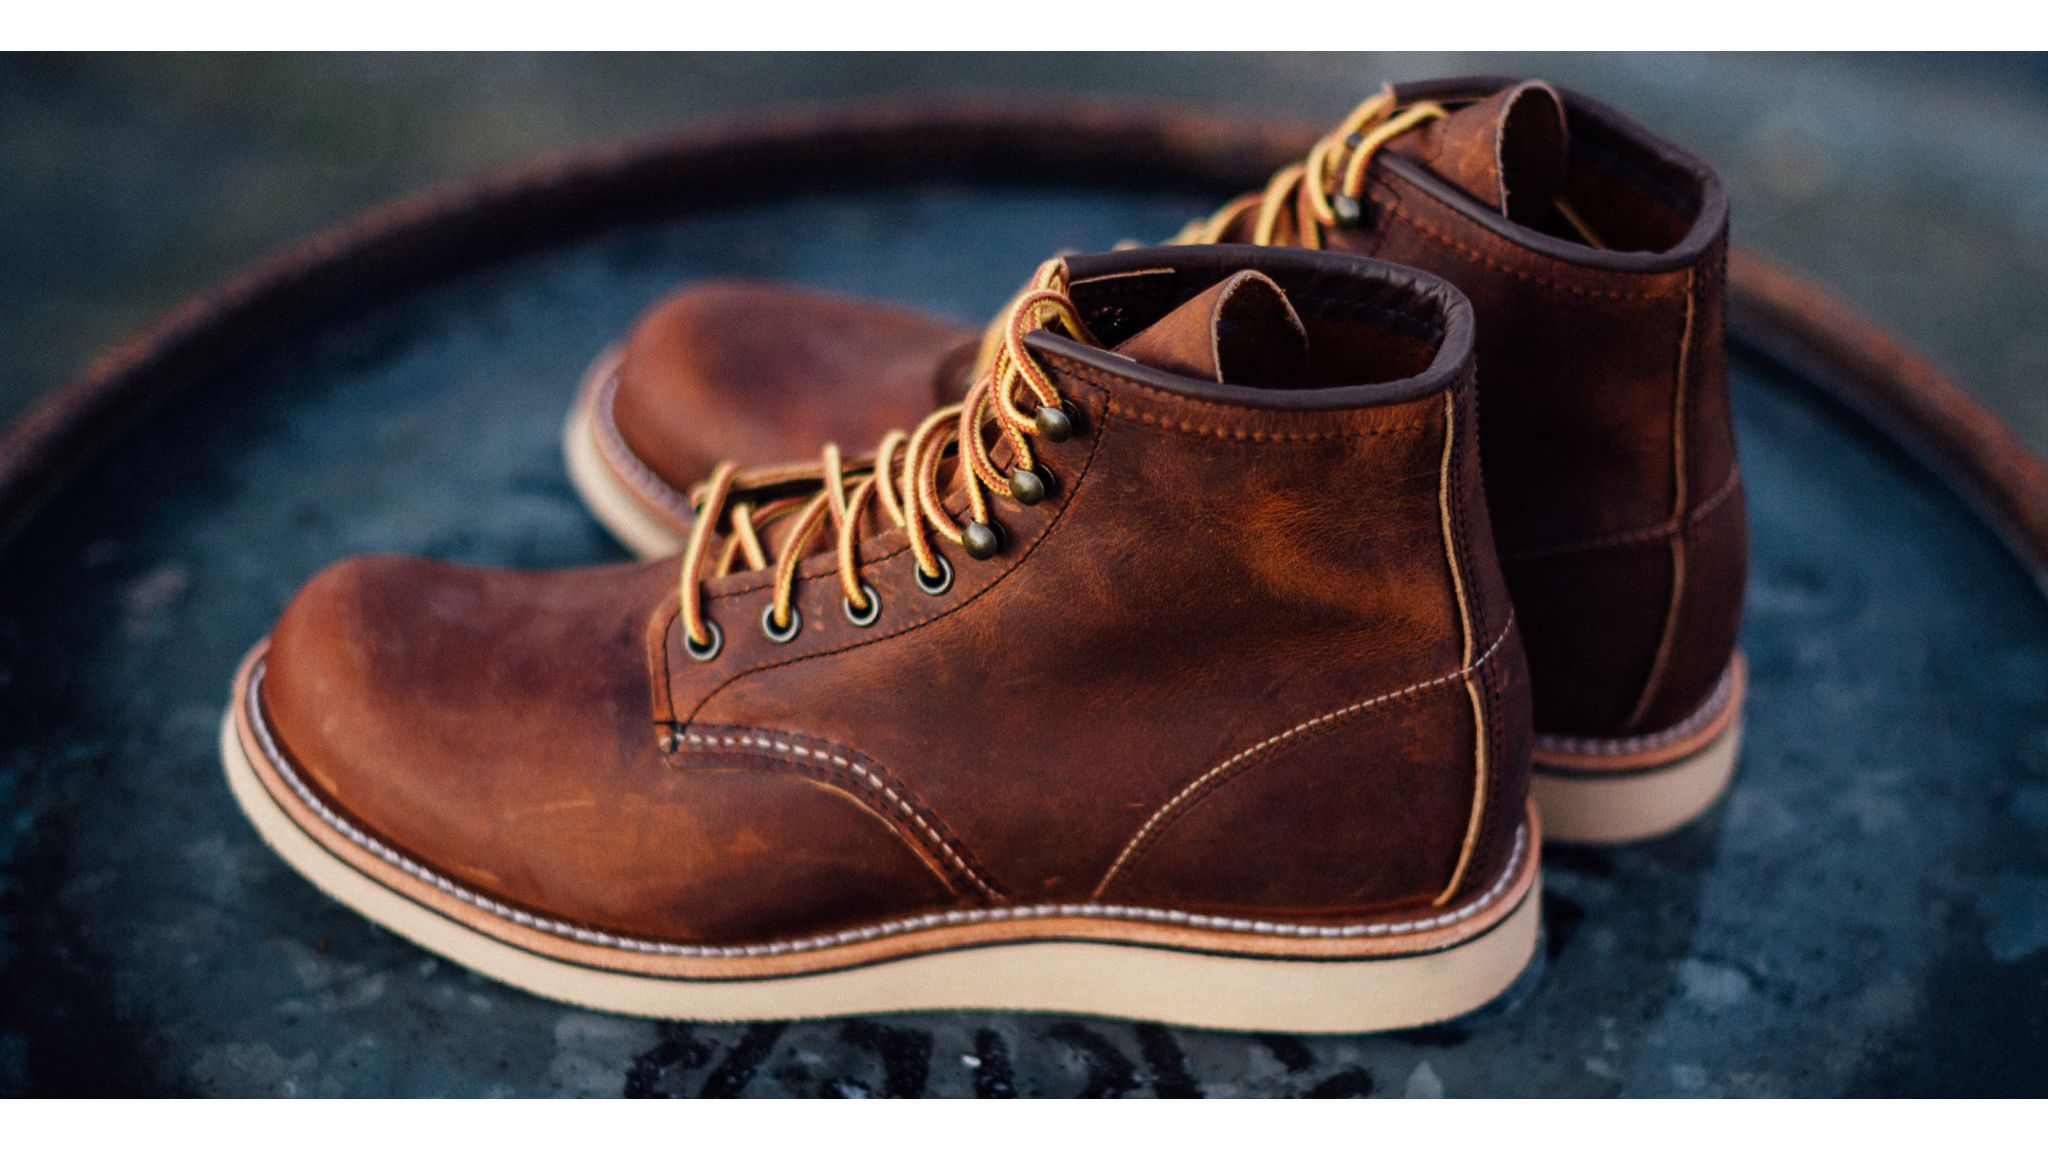 Find a Store  Red Wing Shoes